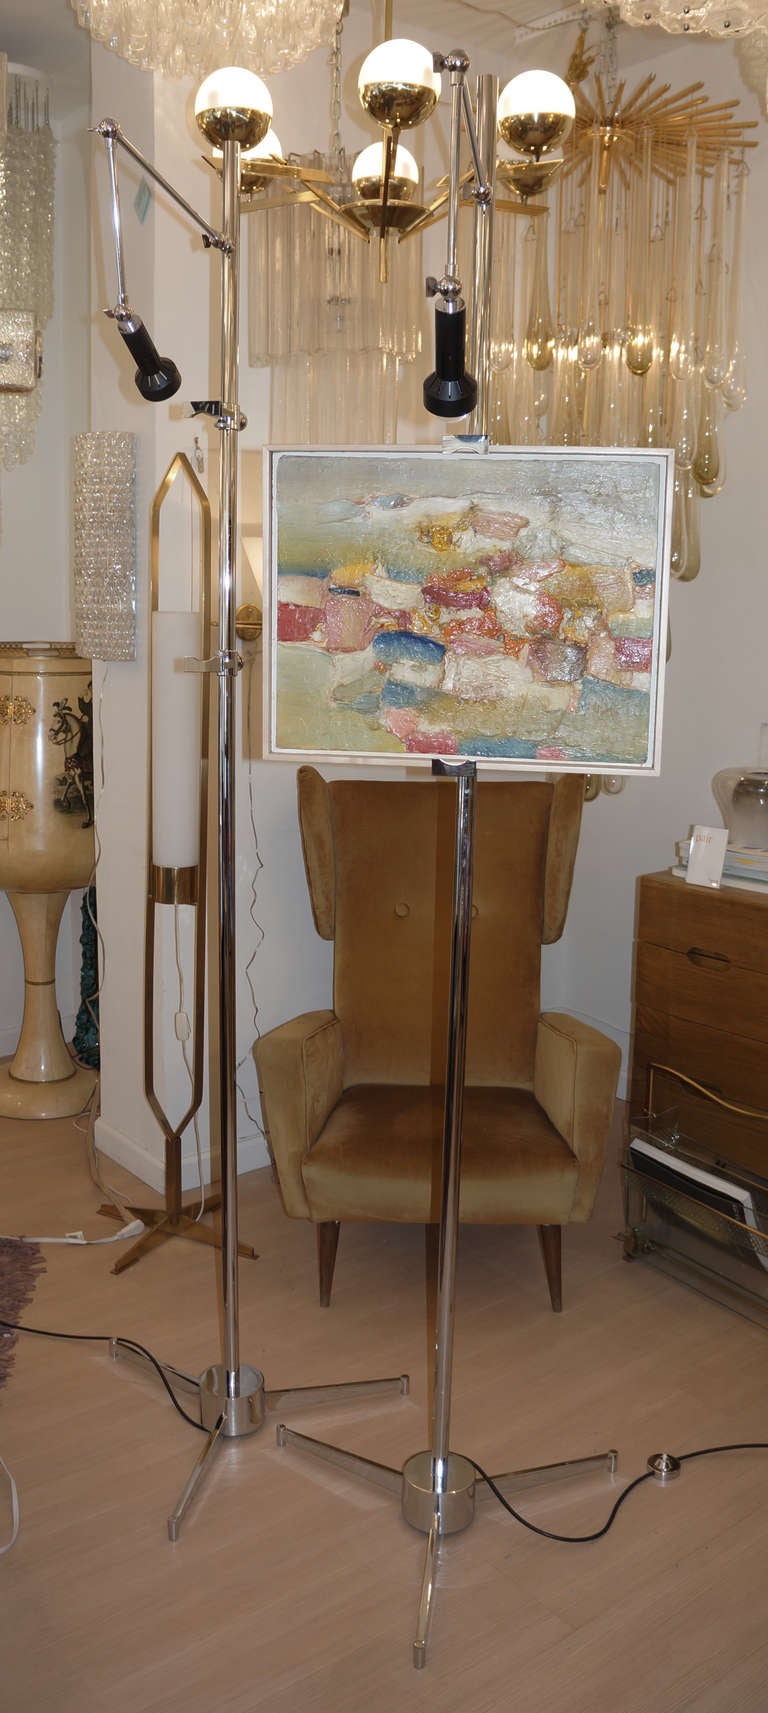 70's Angelo Lelli for Arredoluce easels. Markings on the switch of the easel (Made in Italy, Arredoluce Monza). an articulated arm on top permits to spotlight the painting held by two adjustable arms. The arms holding the painting can be adjusted to